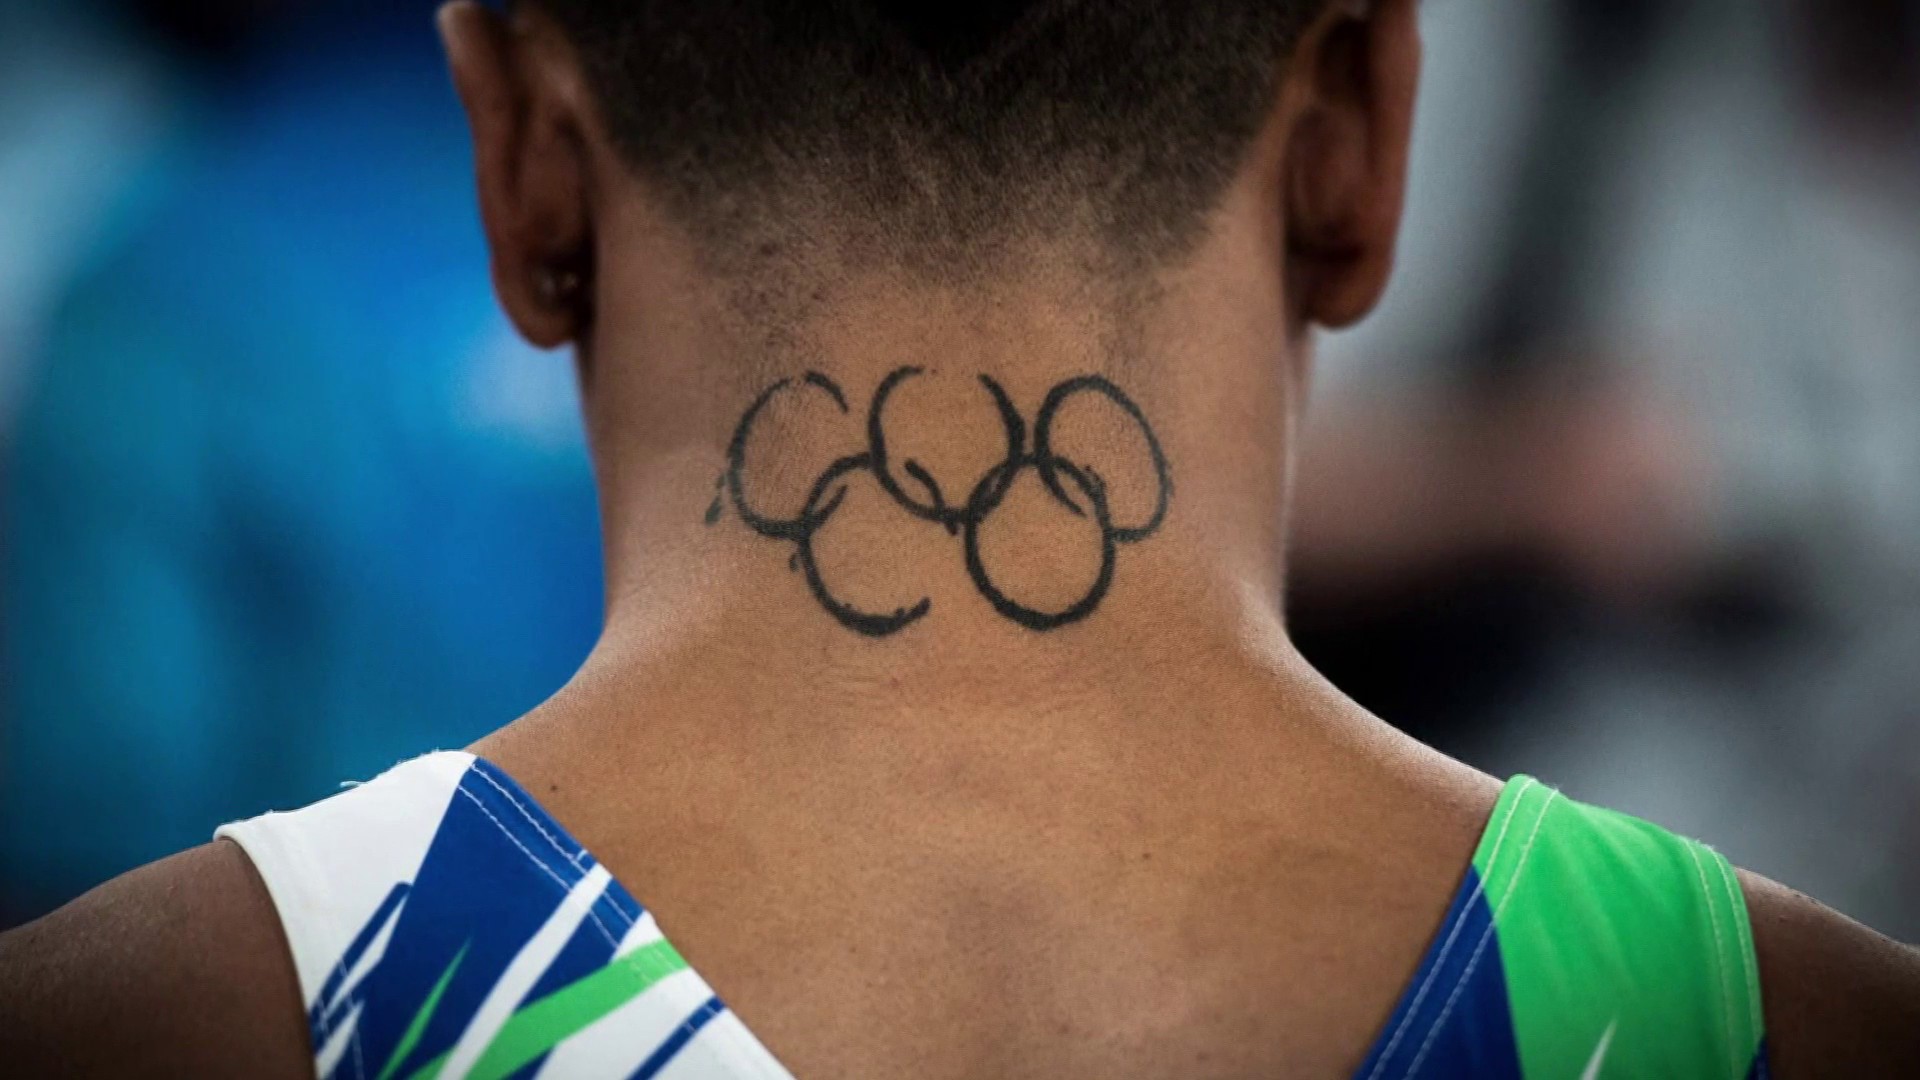 Tokyo Olympics: See athletes' tattoos honoring the games